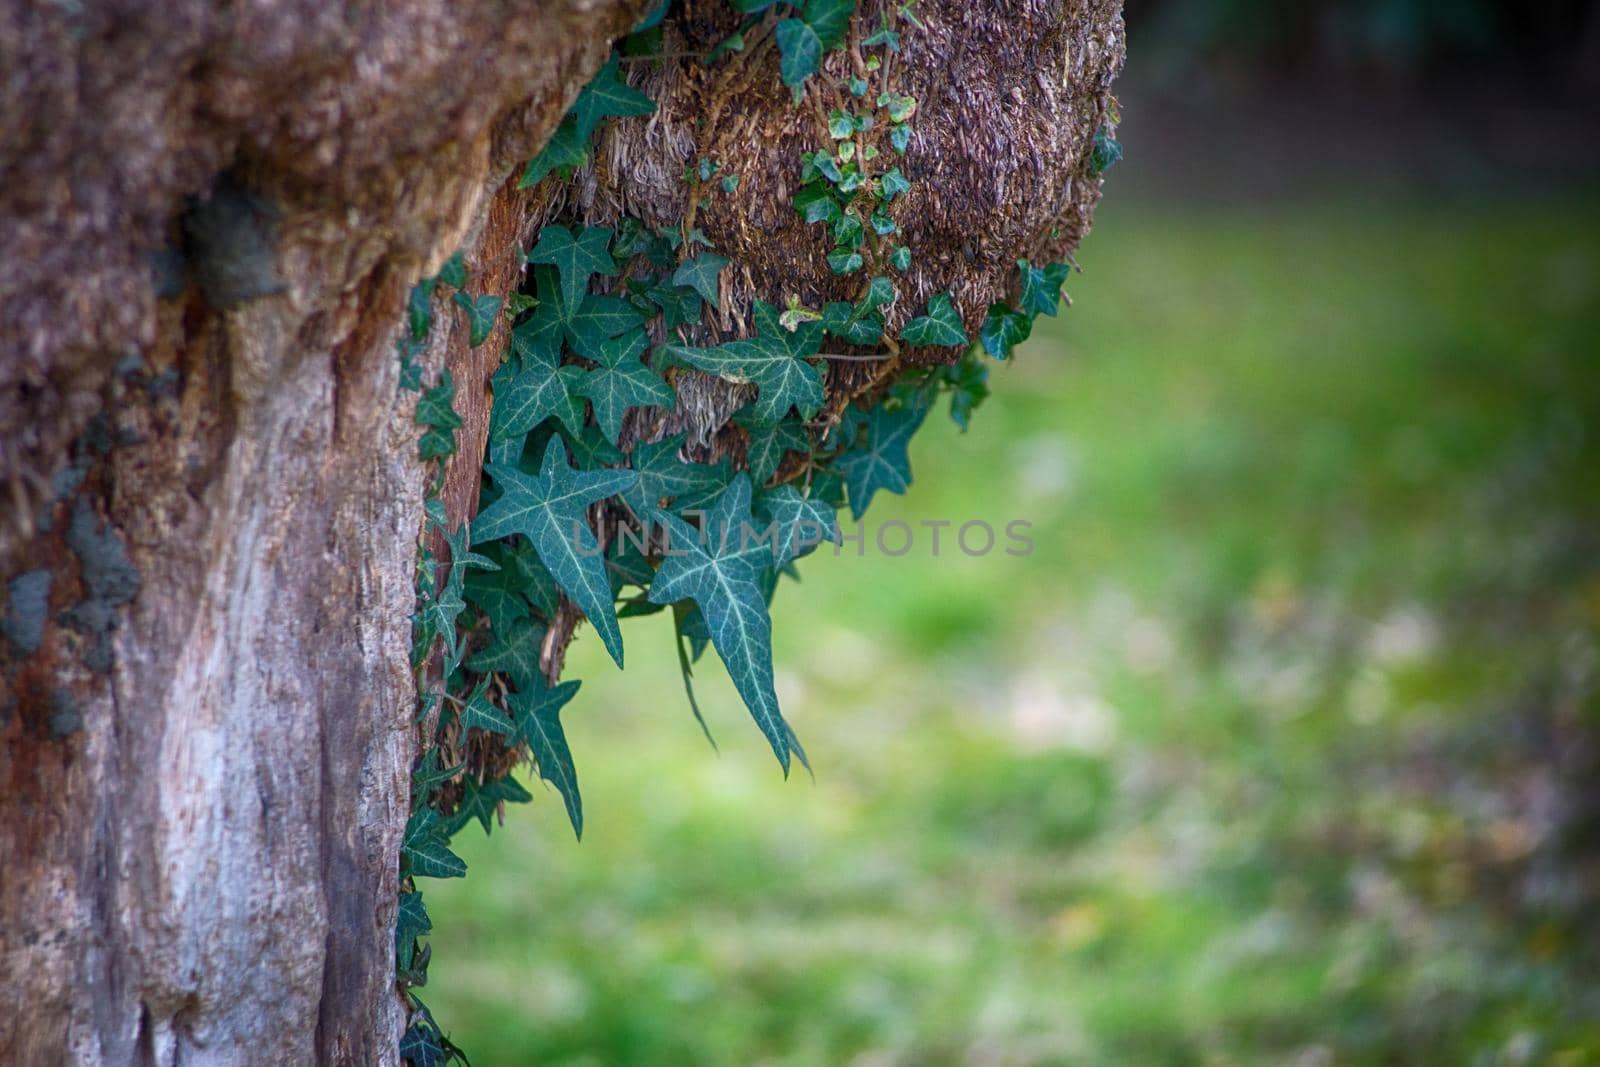 Dangling ivy on the trunk of an old tree on blurred green background by Vvicca